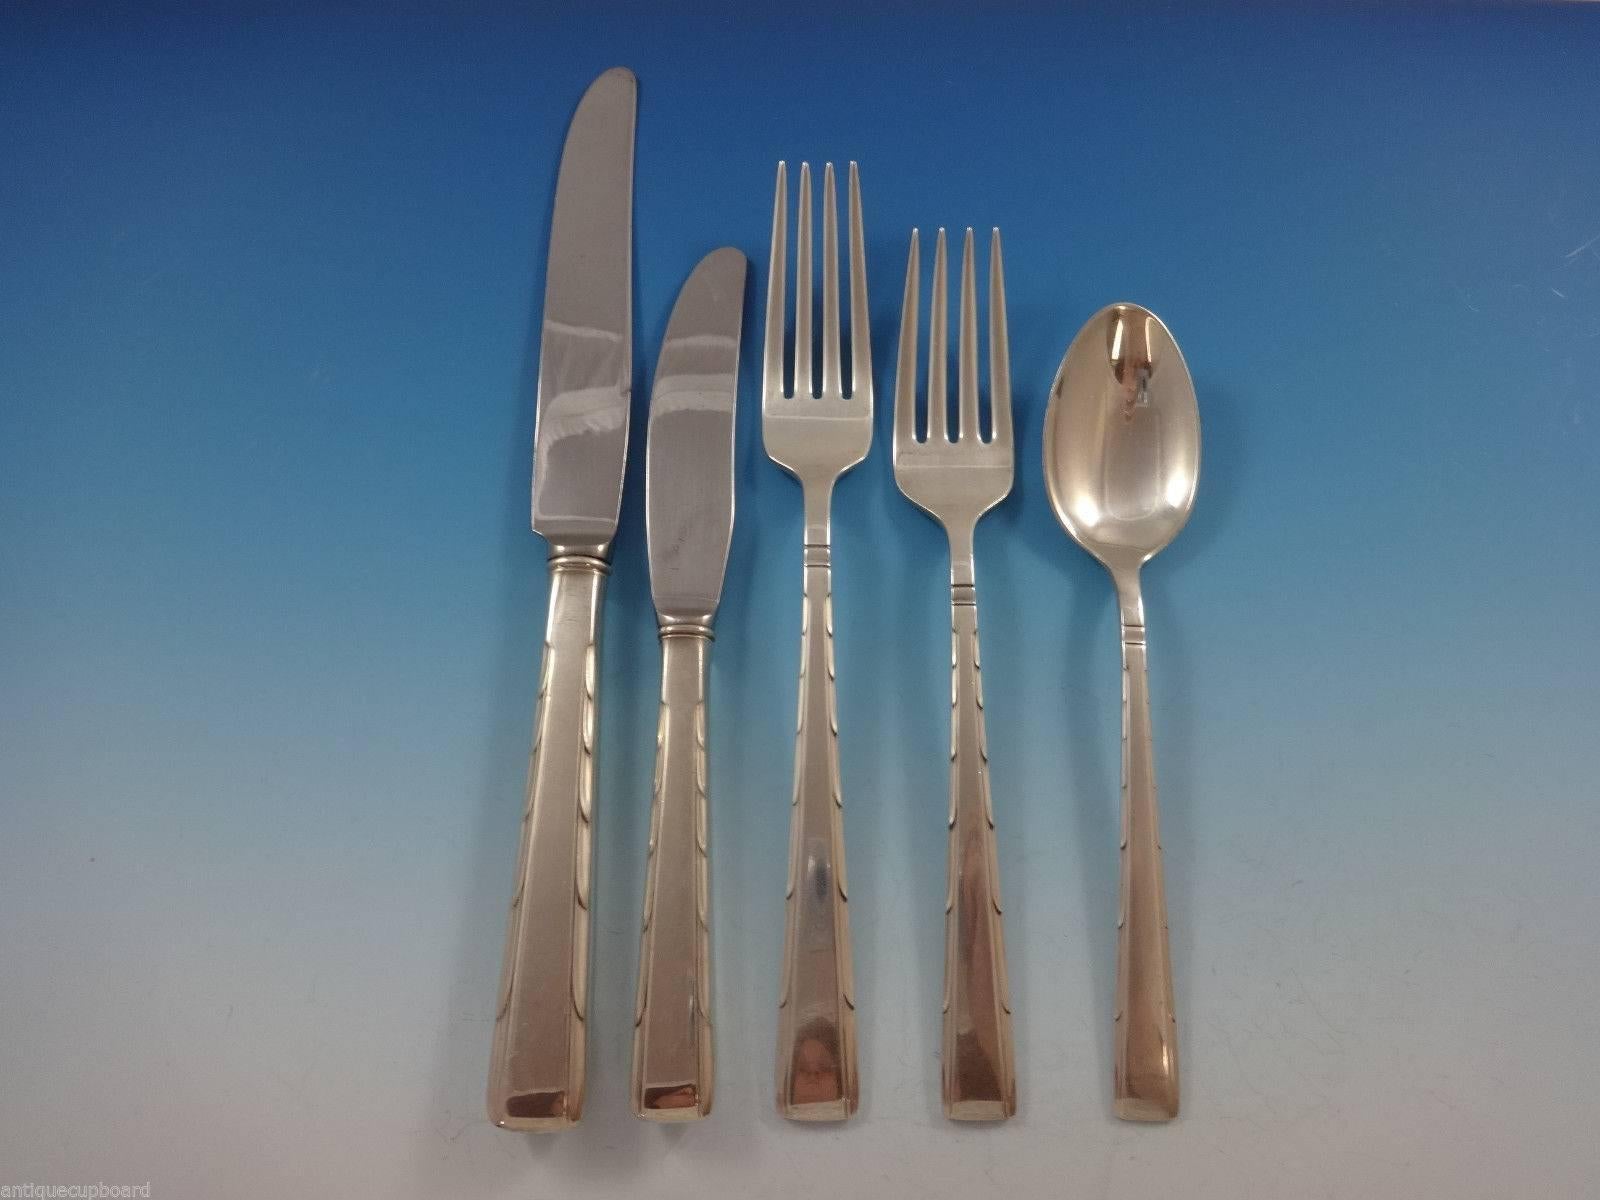 Beautiful Horizon by Easterling sterling silver Flatware set - 41 Pieces. This set includes: 

8 KNIVES, 8 7/8